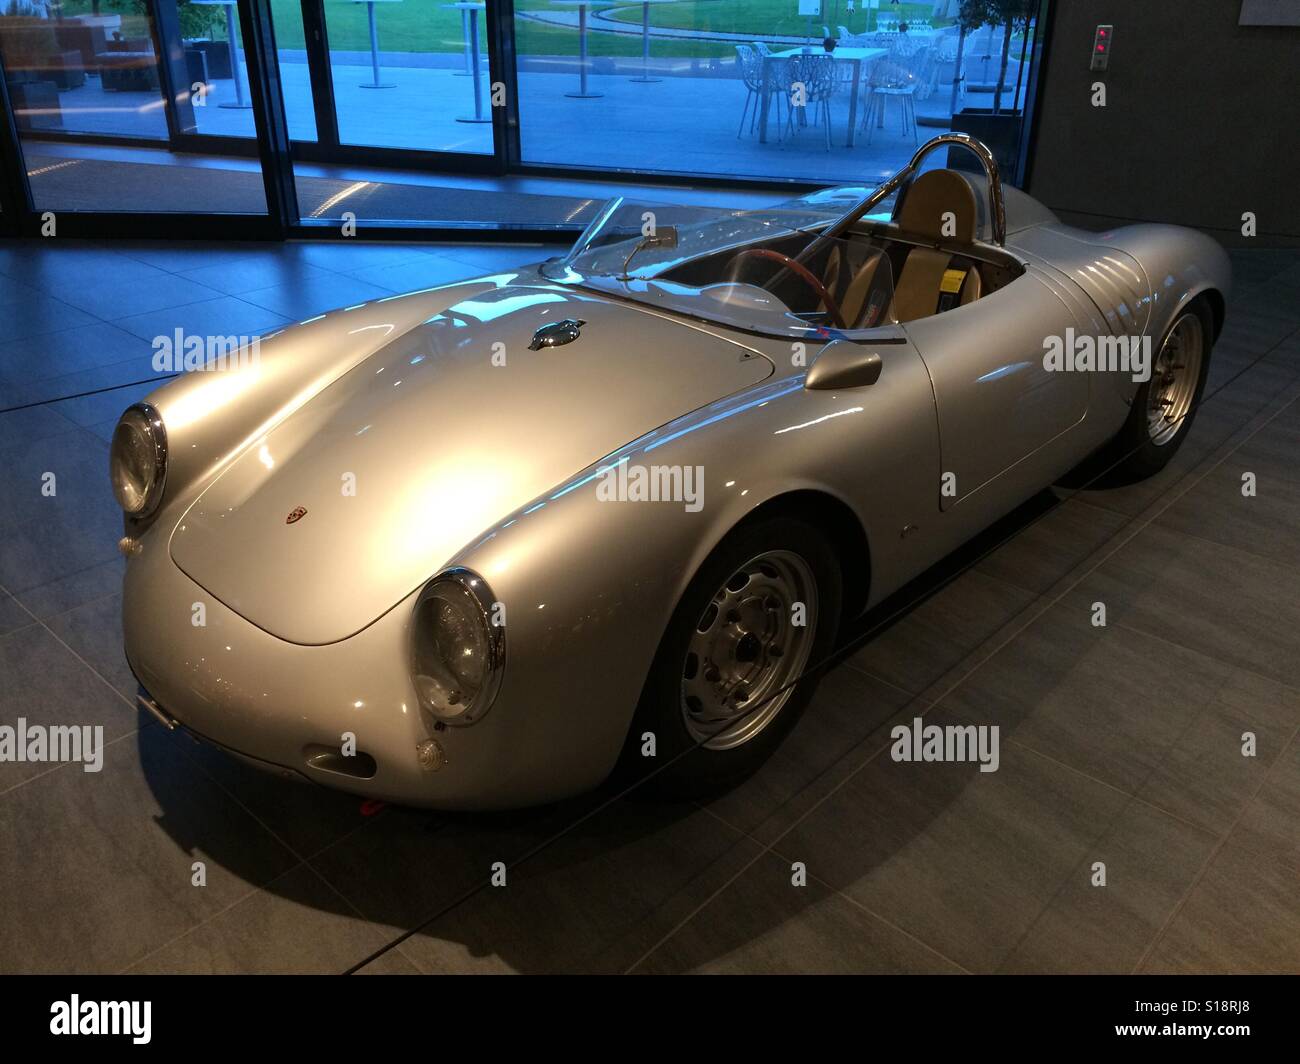 Porsche car on display in Germany. Stock Photo